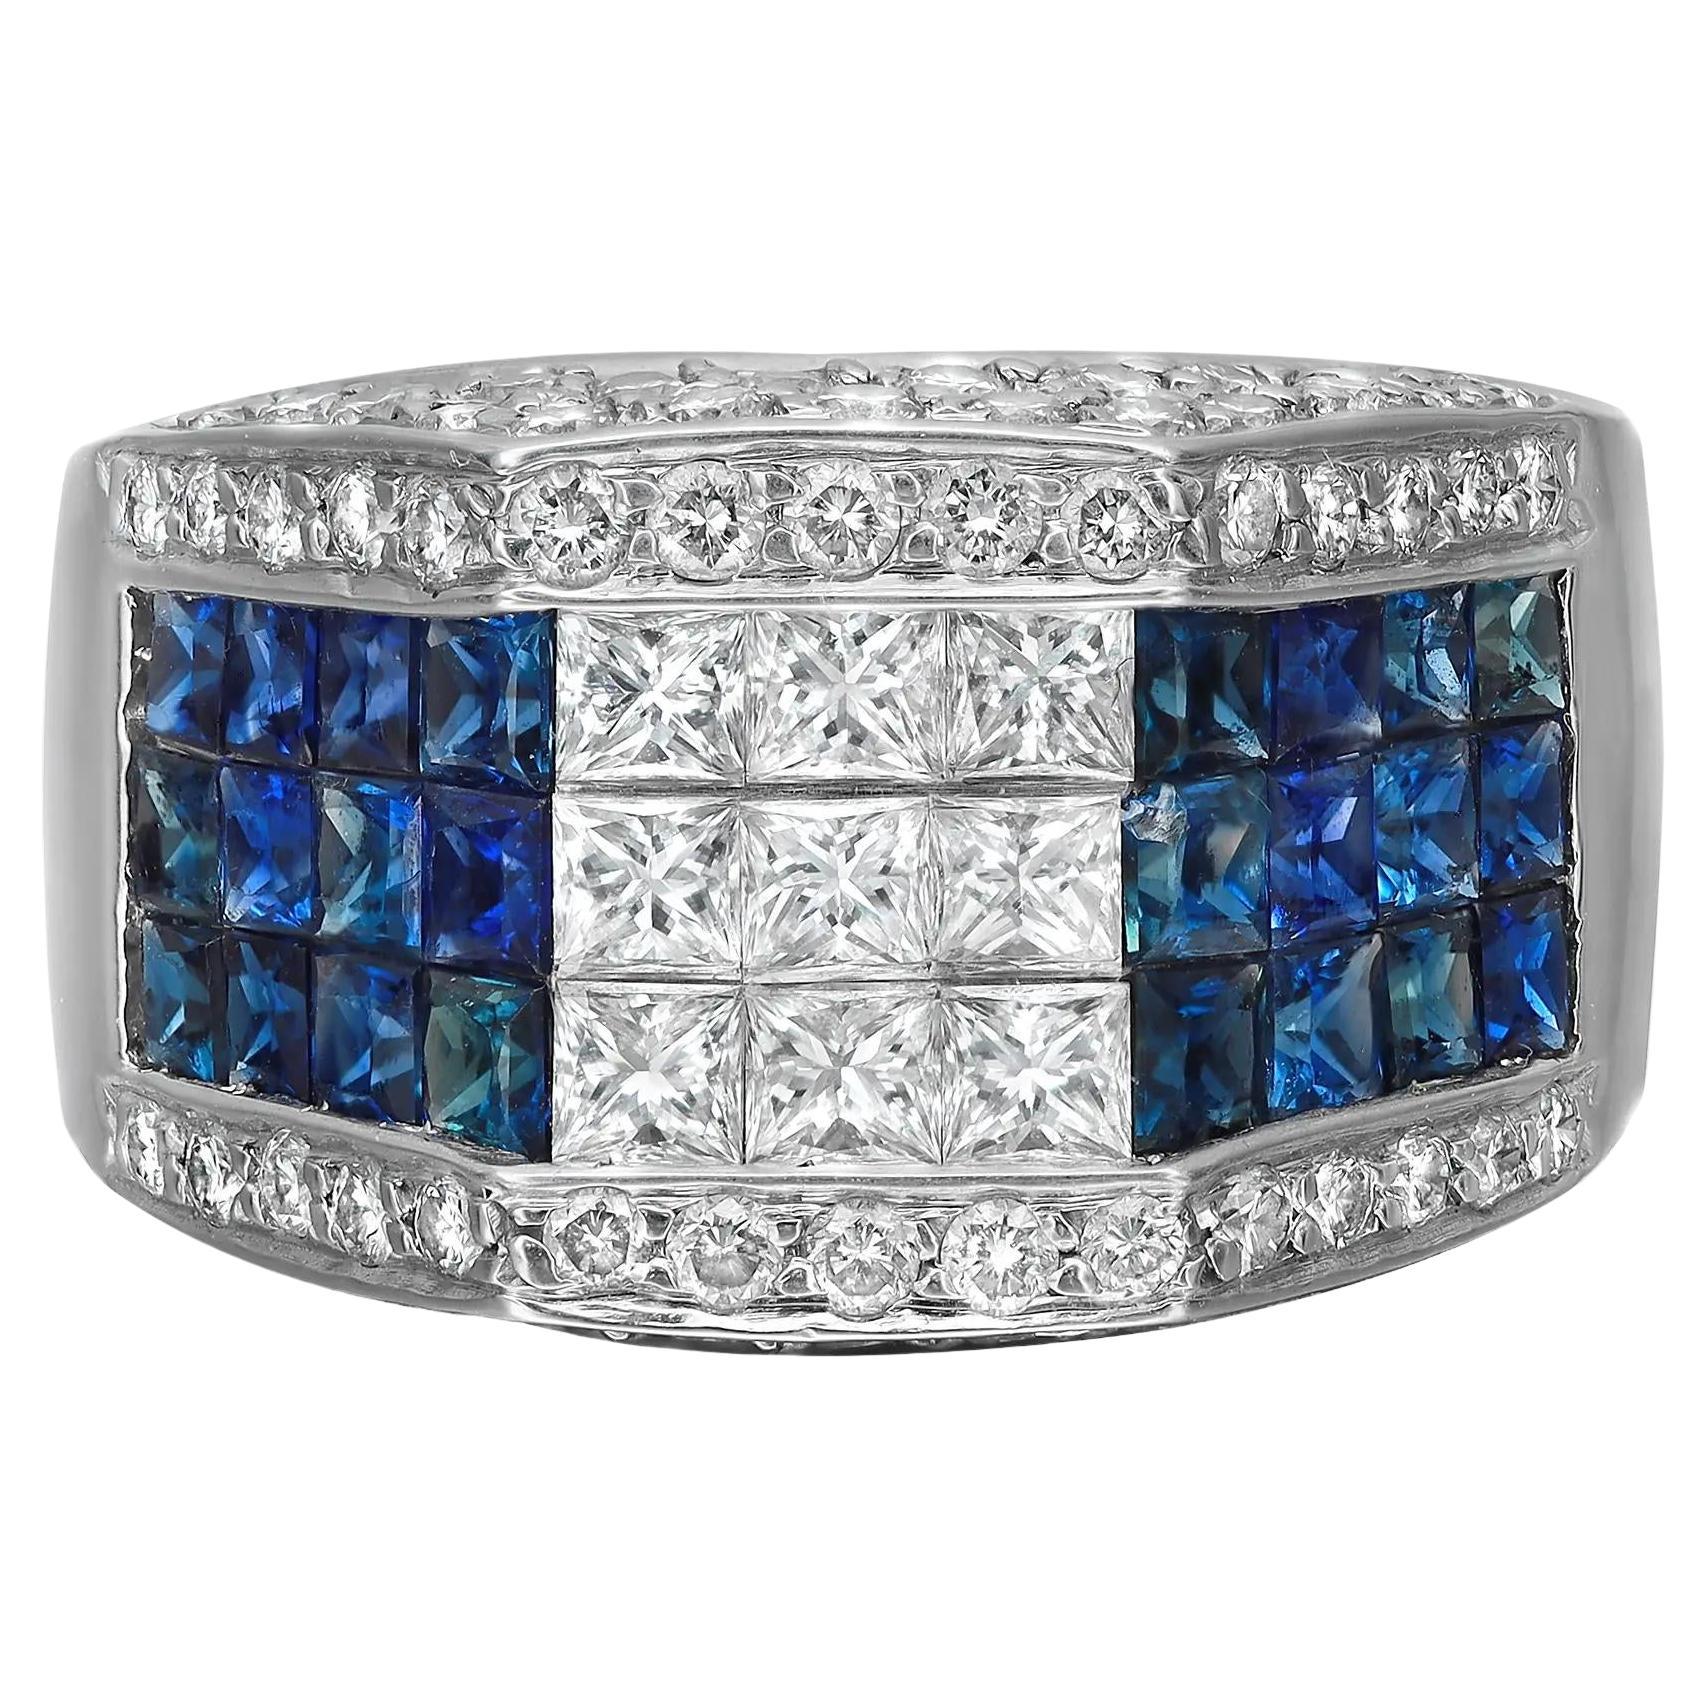 1.09Ctw Diamond & 1.20Ctw Blue Sapphire Cocktail Ring 18K White Gold Size 7 For Sale